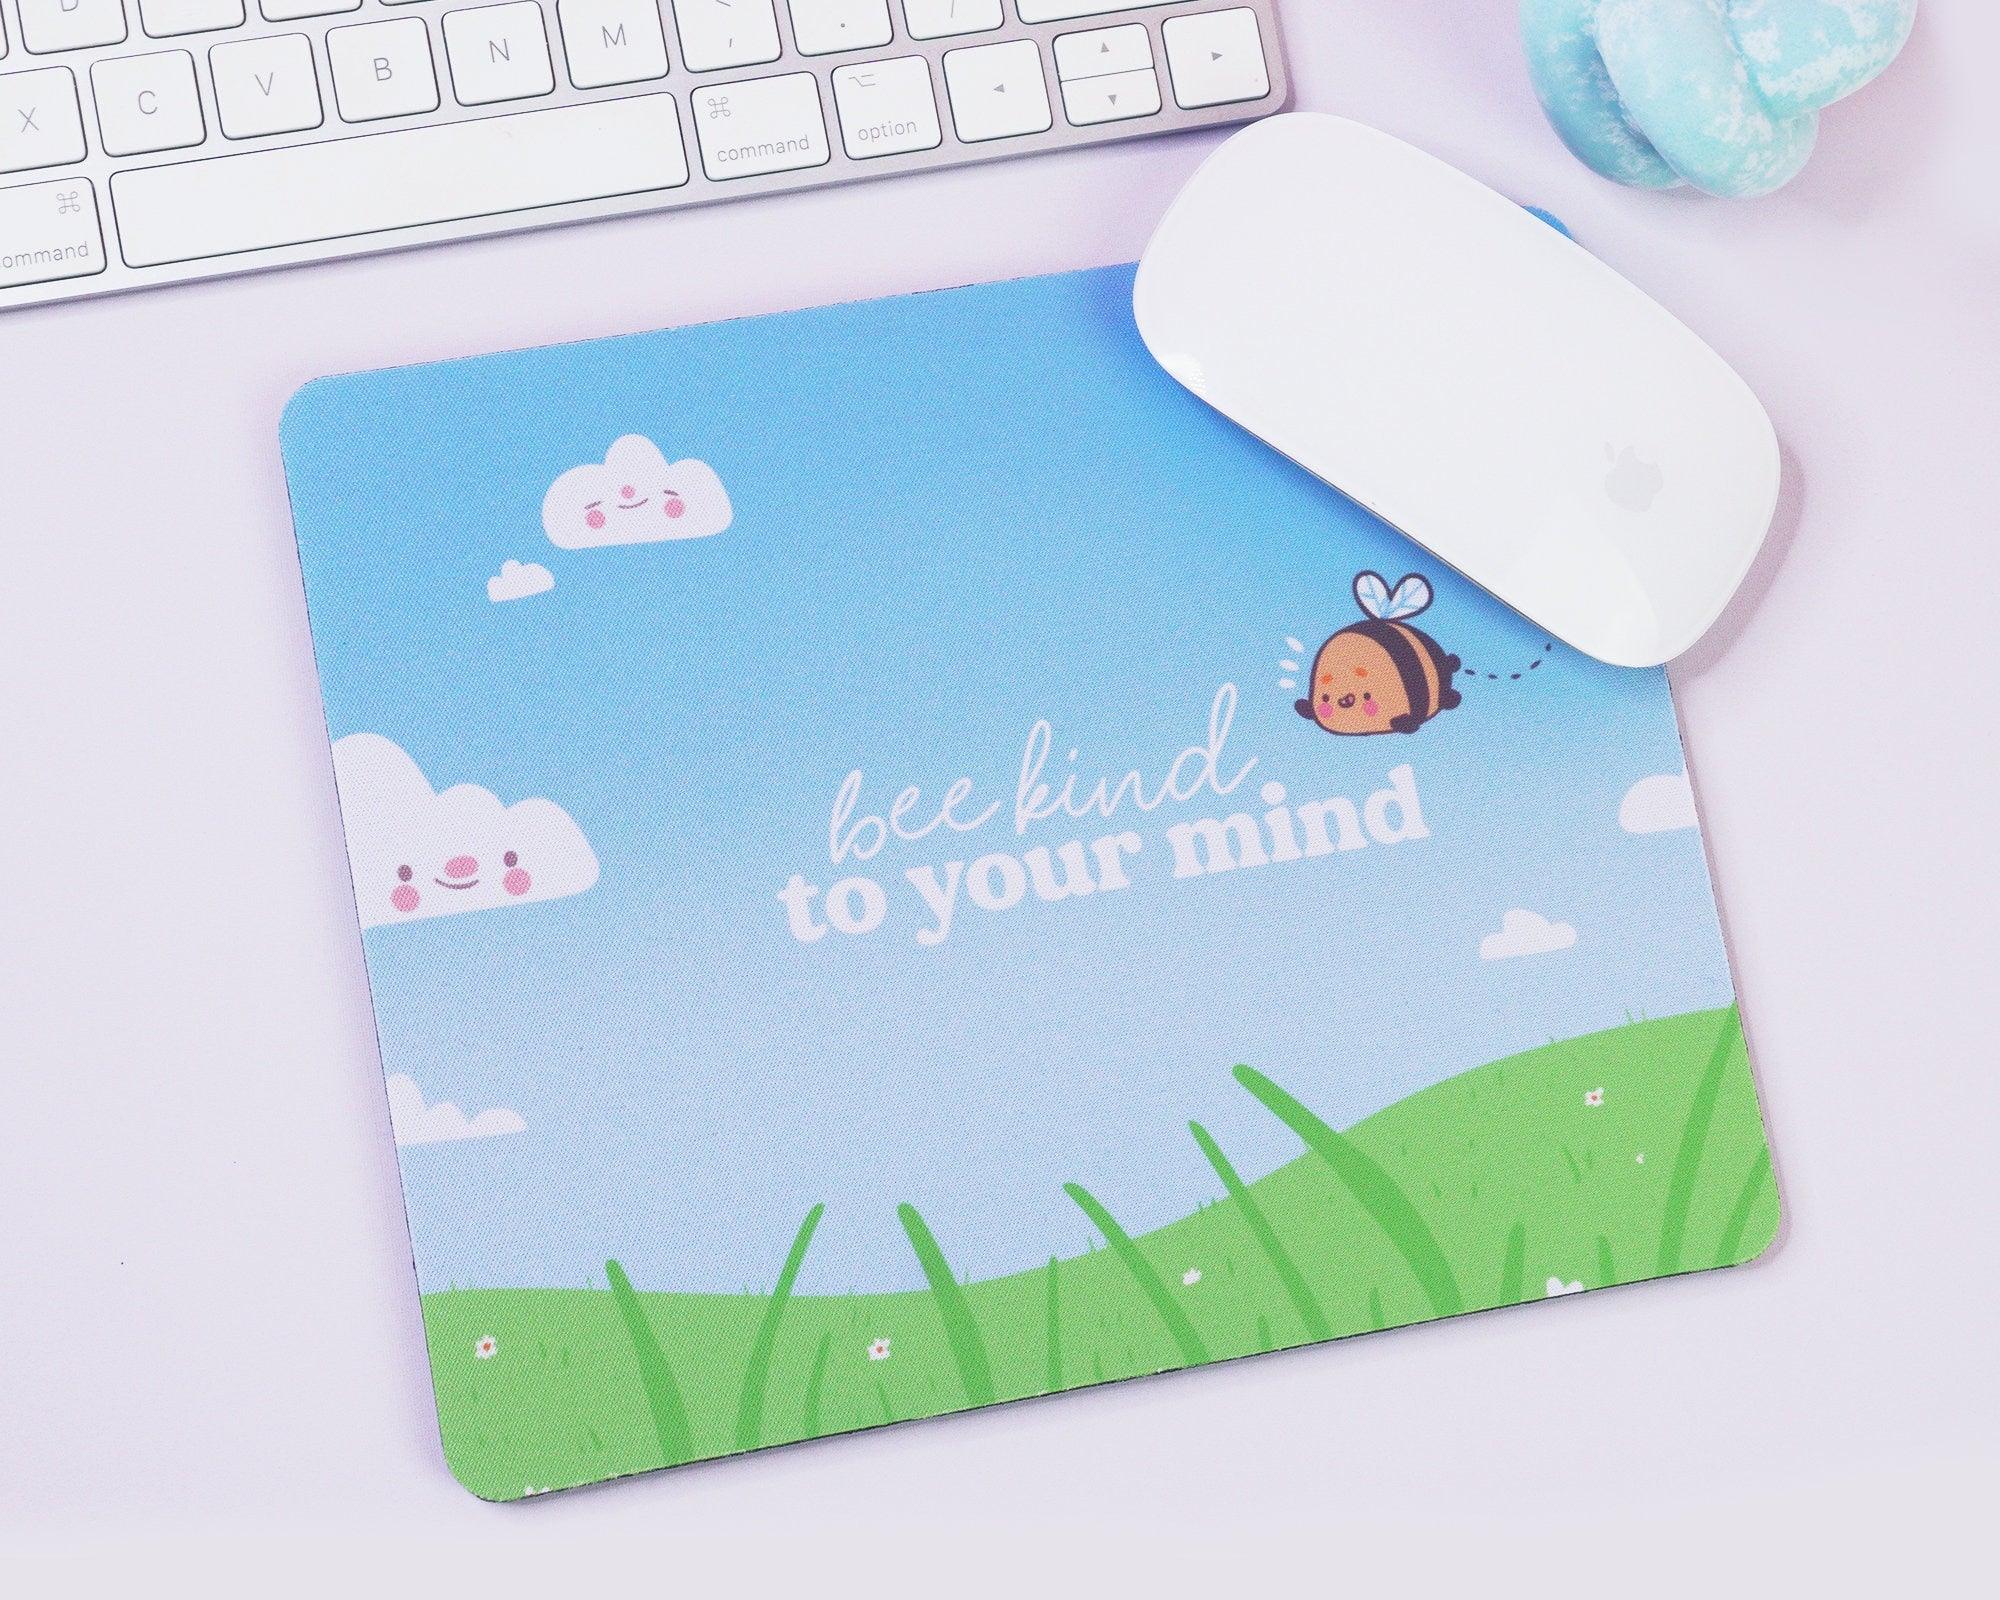 Rectangle Mouse Pads